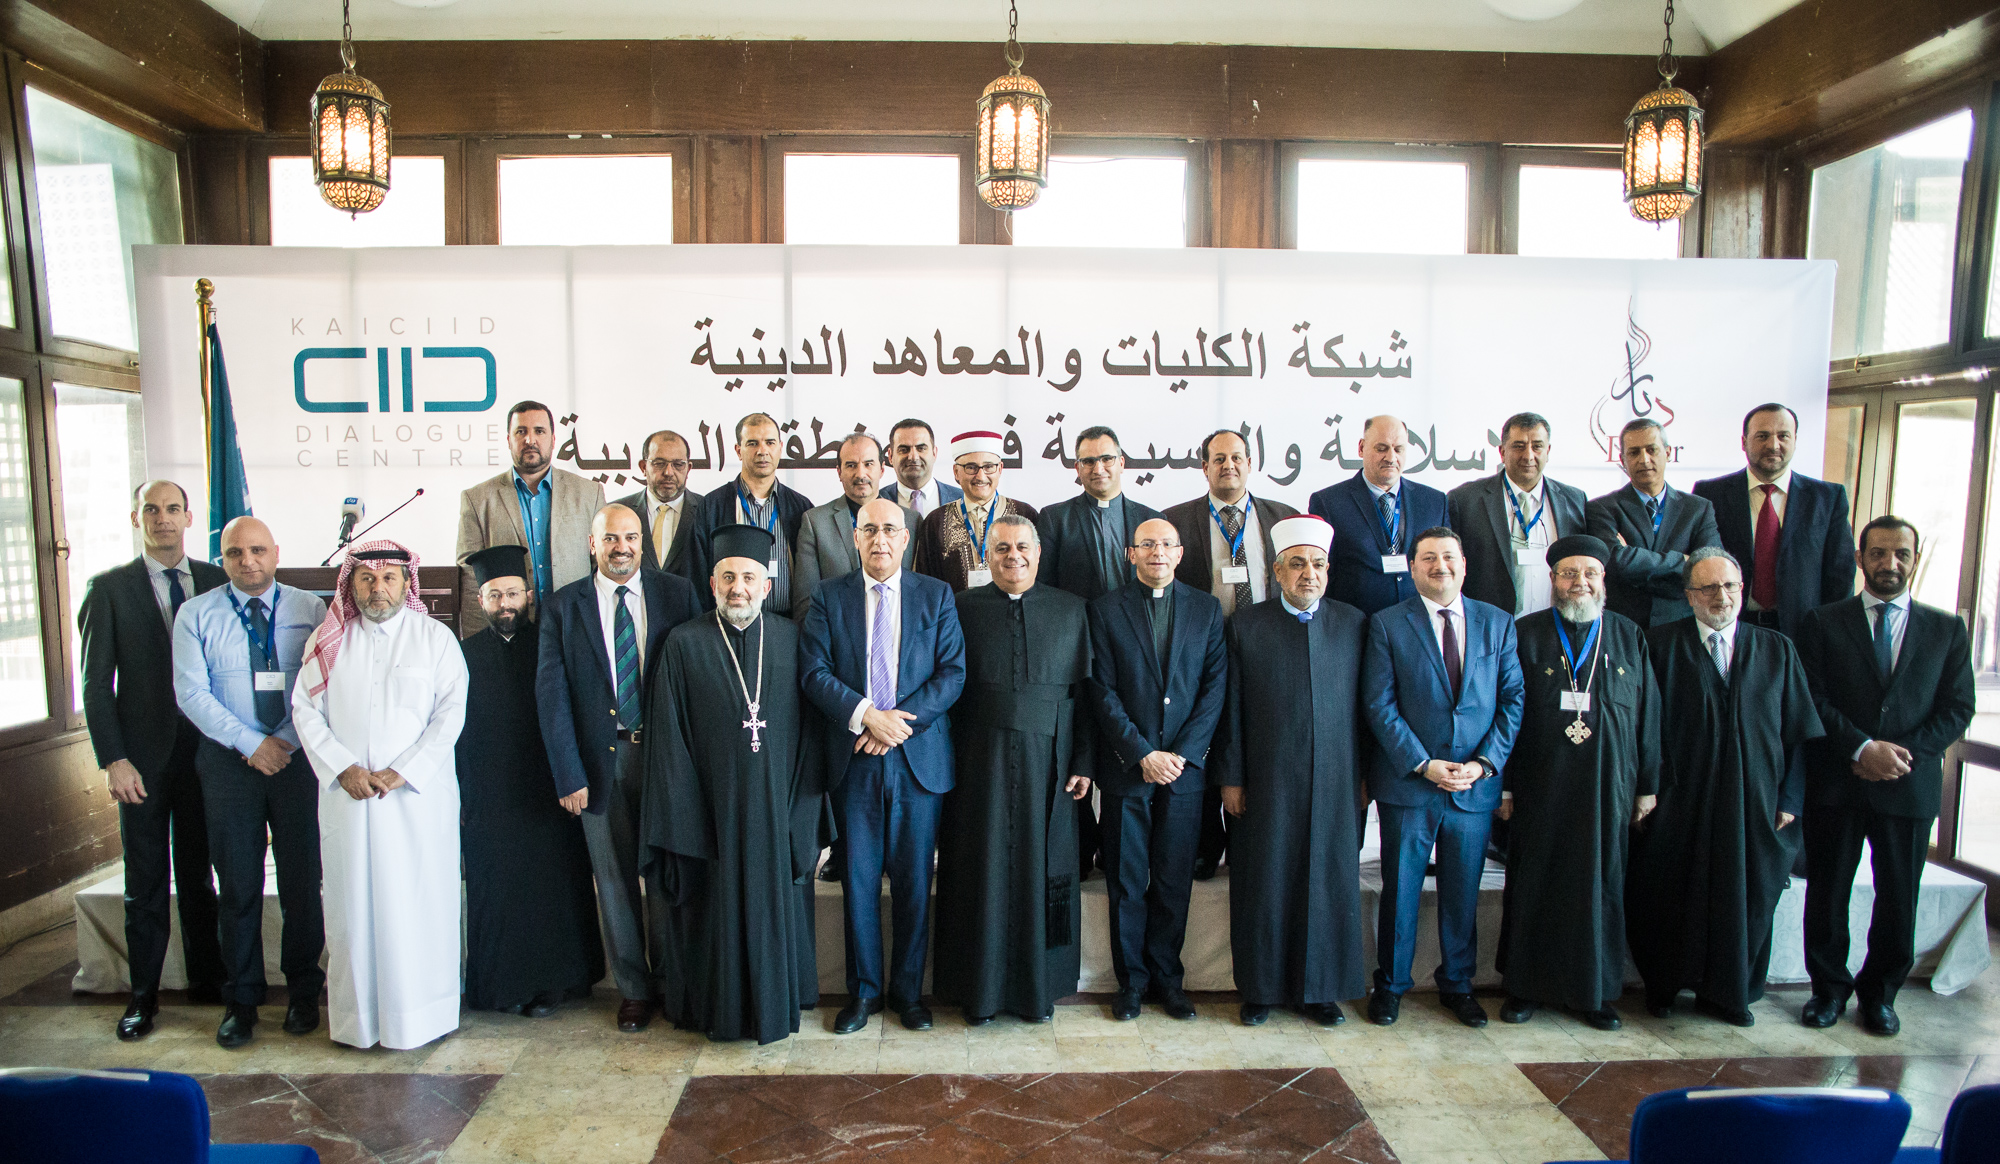 Network for Religious Christian and Muslim Faculties and Institutes in the Arab World